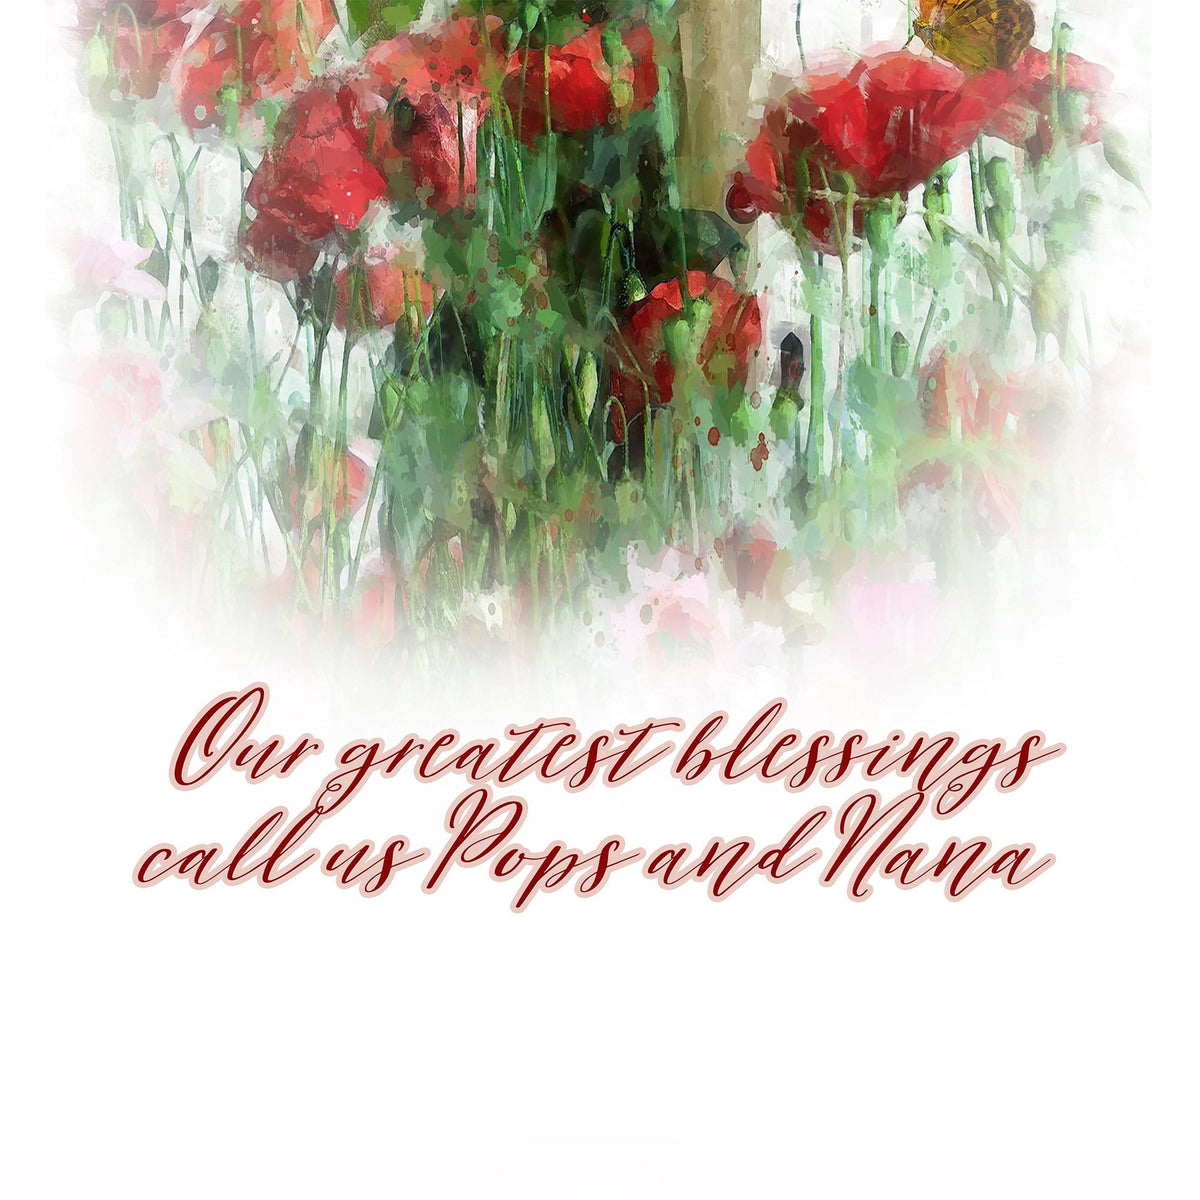 Quote reads: Our greatest blessings call us... (personalized with grandparent&#39;s names here)